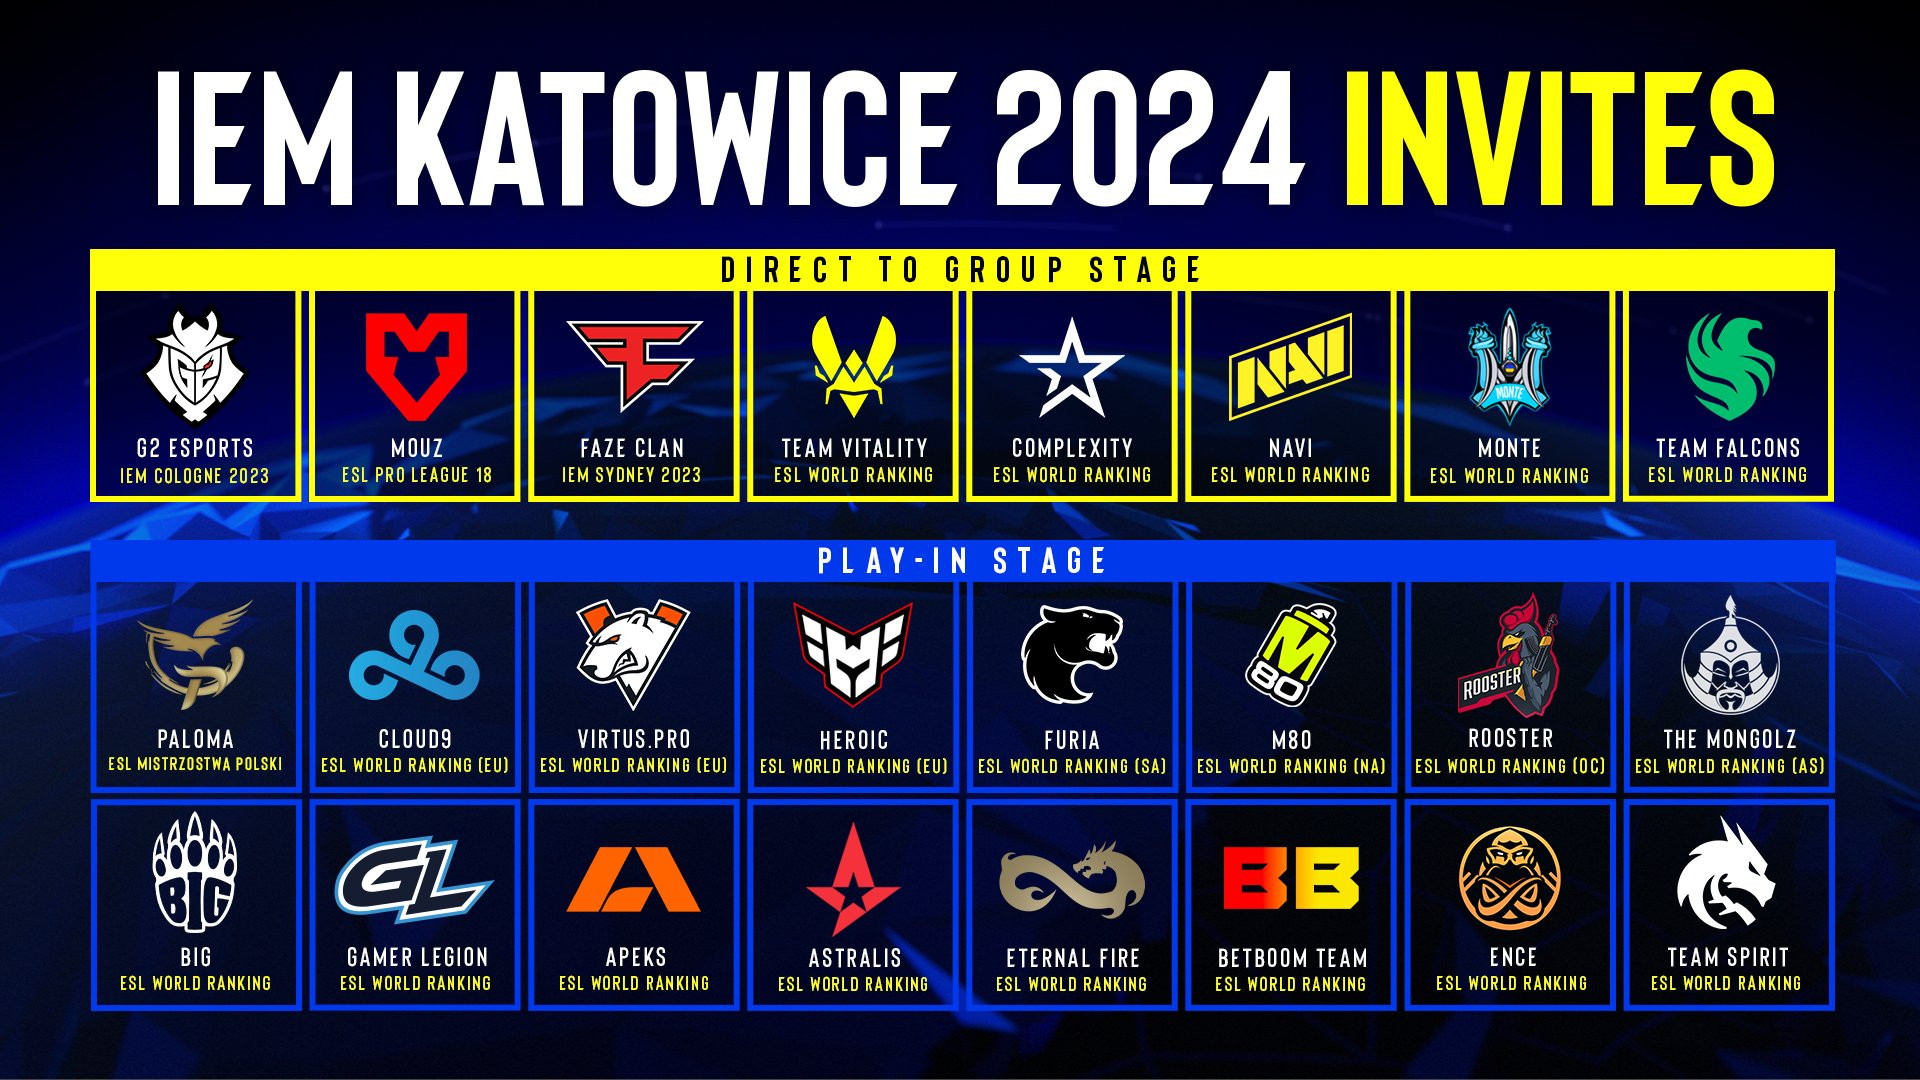 All Intel® Extreme Masters Katowice 2023 participants revealed